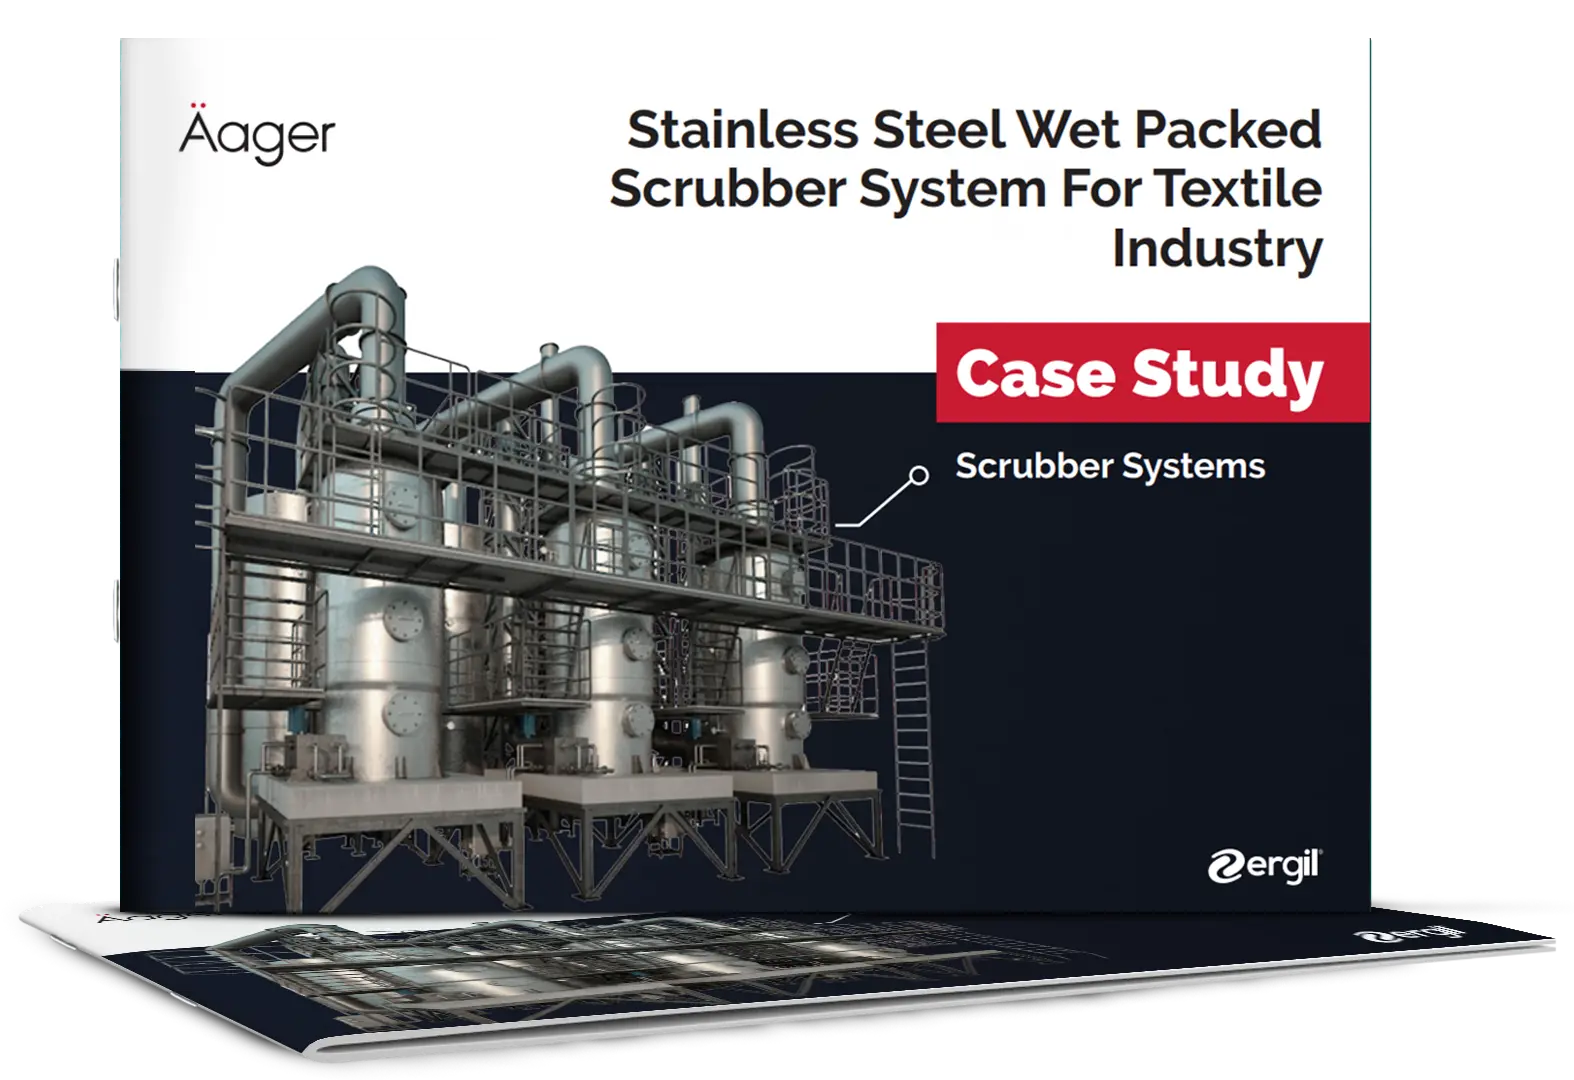 Stainless Steel Wet Packed Scrubber System for Textile Industry 33